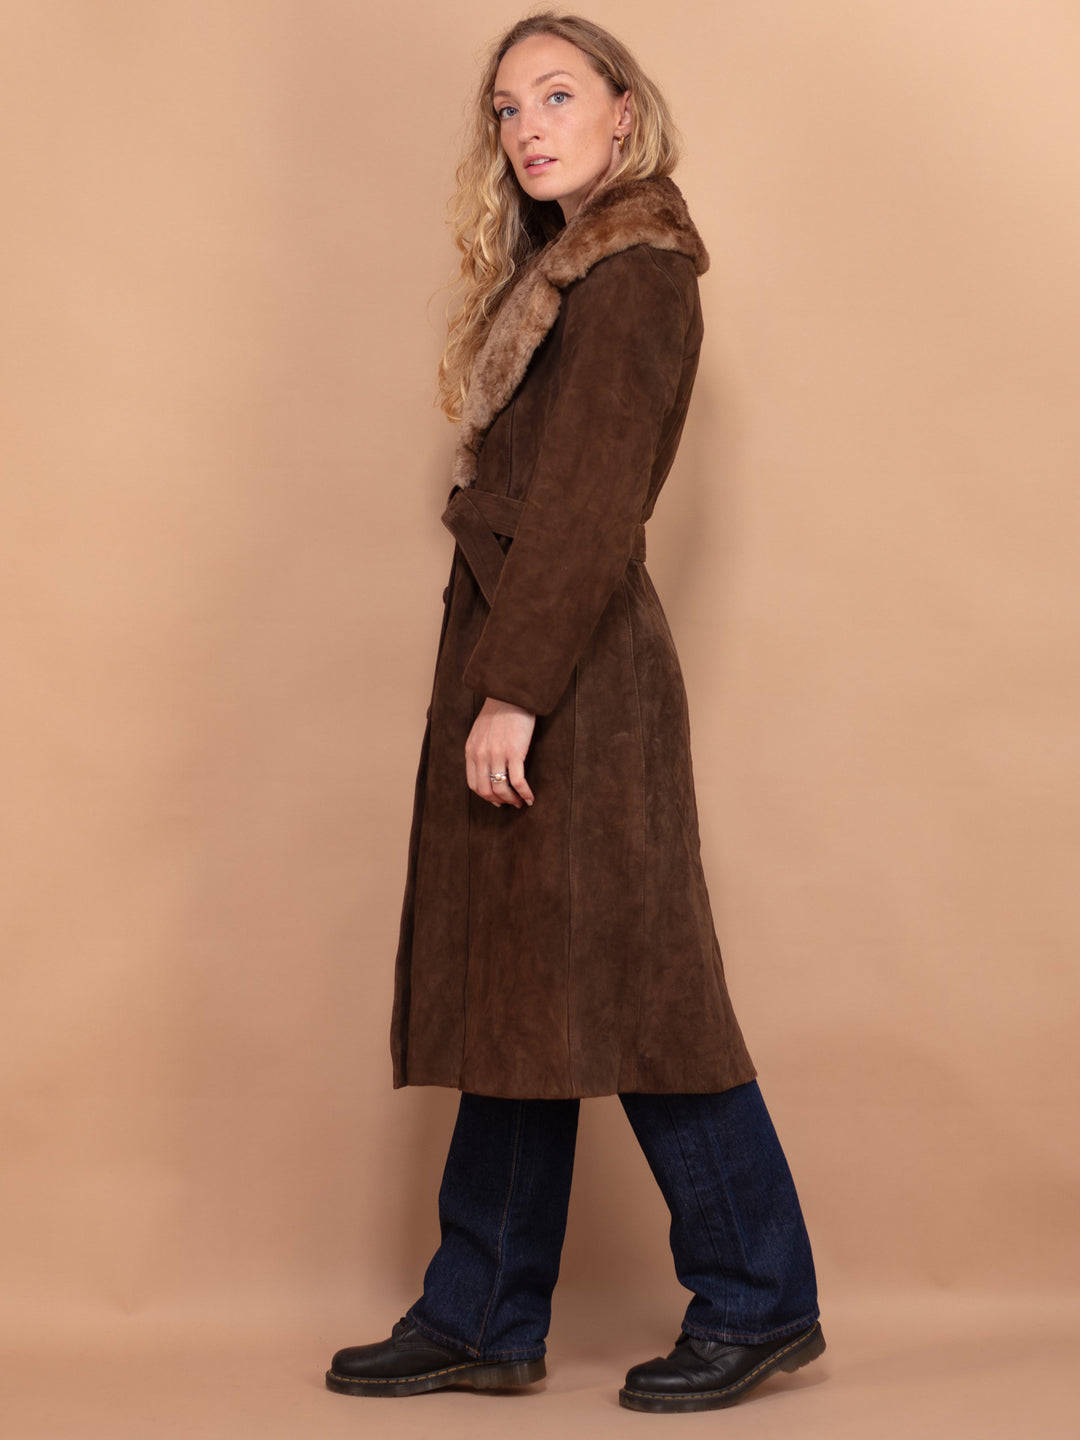 Suede Long Coat 70s, Size Small, Genuine Suede Coat, Shearling Trim Coat, Hippie Boho Coat, Vintage Sustainable Clothing, Made In England